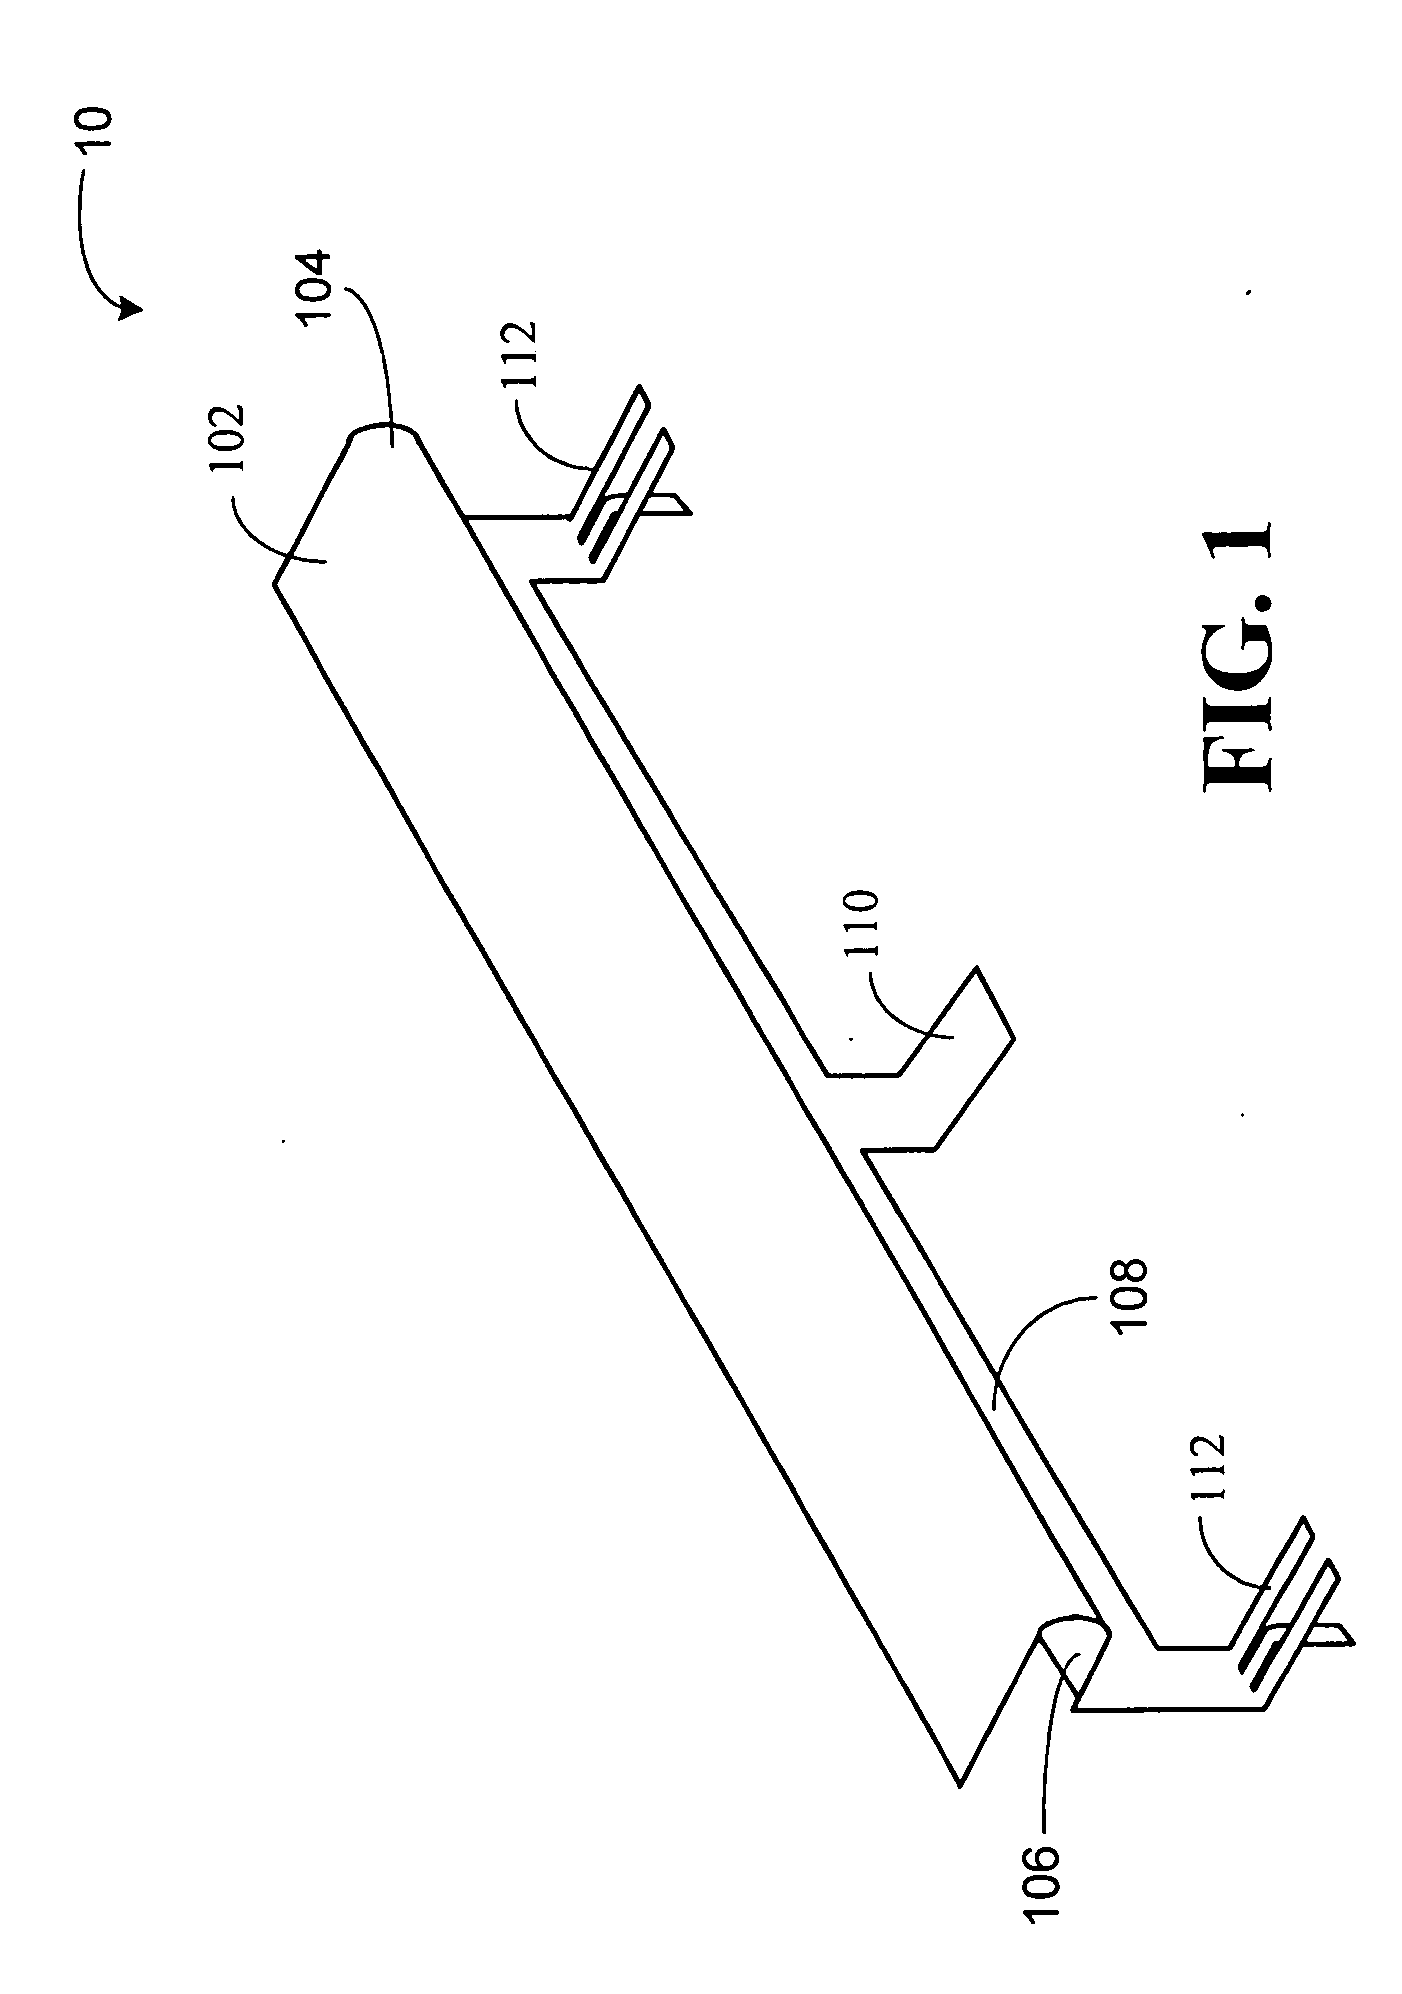 Apparatus for stiffening a circuit board